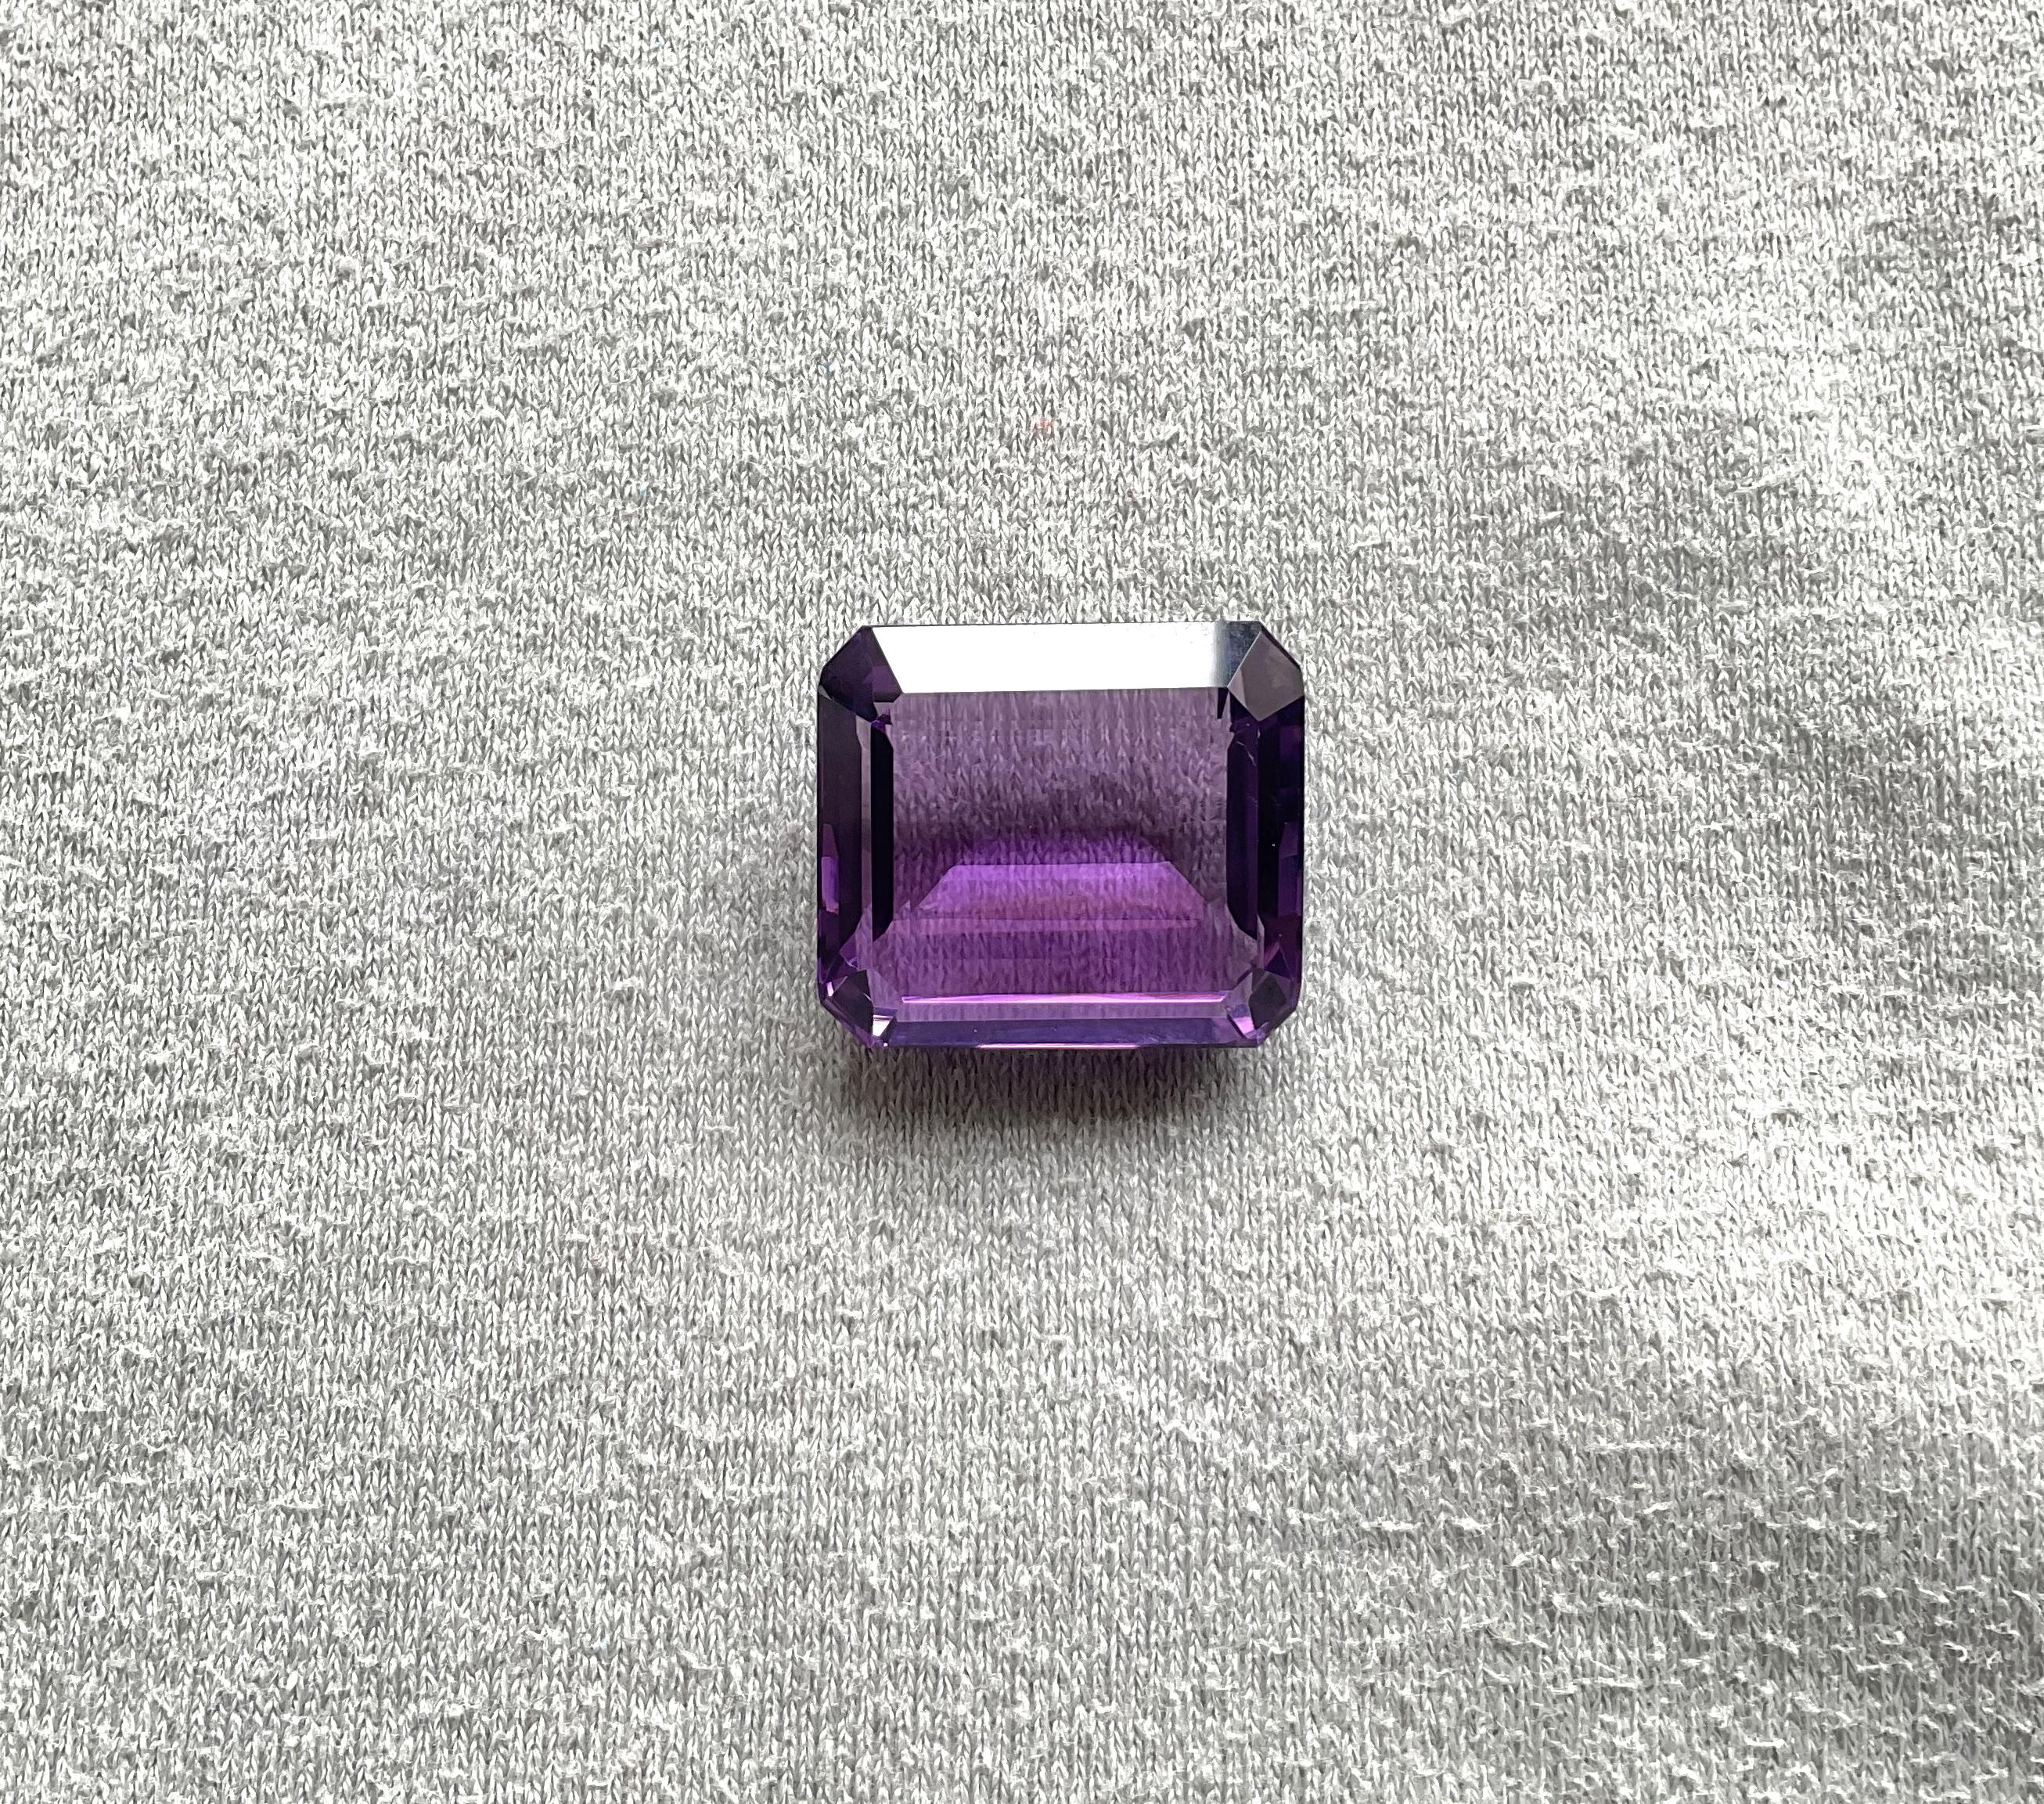 28.12 Carat Amethyst Top Quality Faceted Octagon Loose Gemstone For Jewelry Gem

Gemstone-Amethyst 
Shape - Octagon
size - 20x18x9 MM
Weight - 28.12
Quantity - 1 Piece